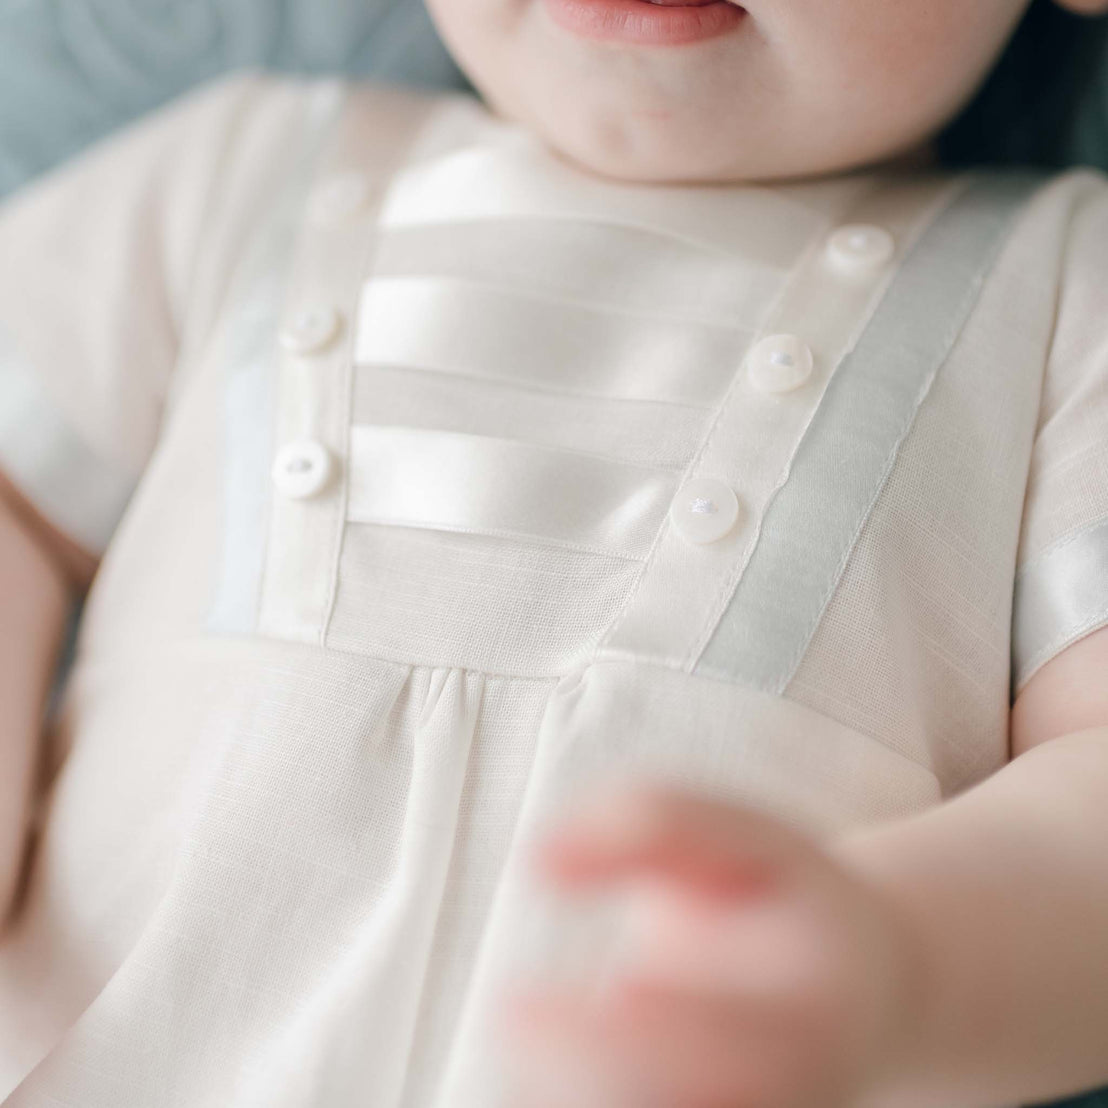 Close-up of a baby dressed in the Owen Linen Romper with button details, focusing on the outfit and partial view of the baby's hand.